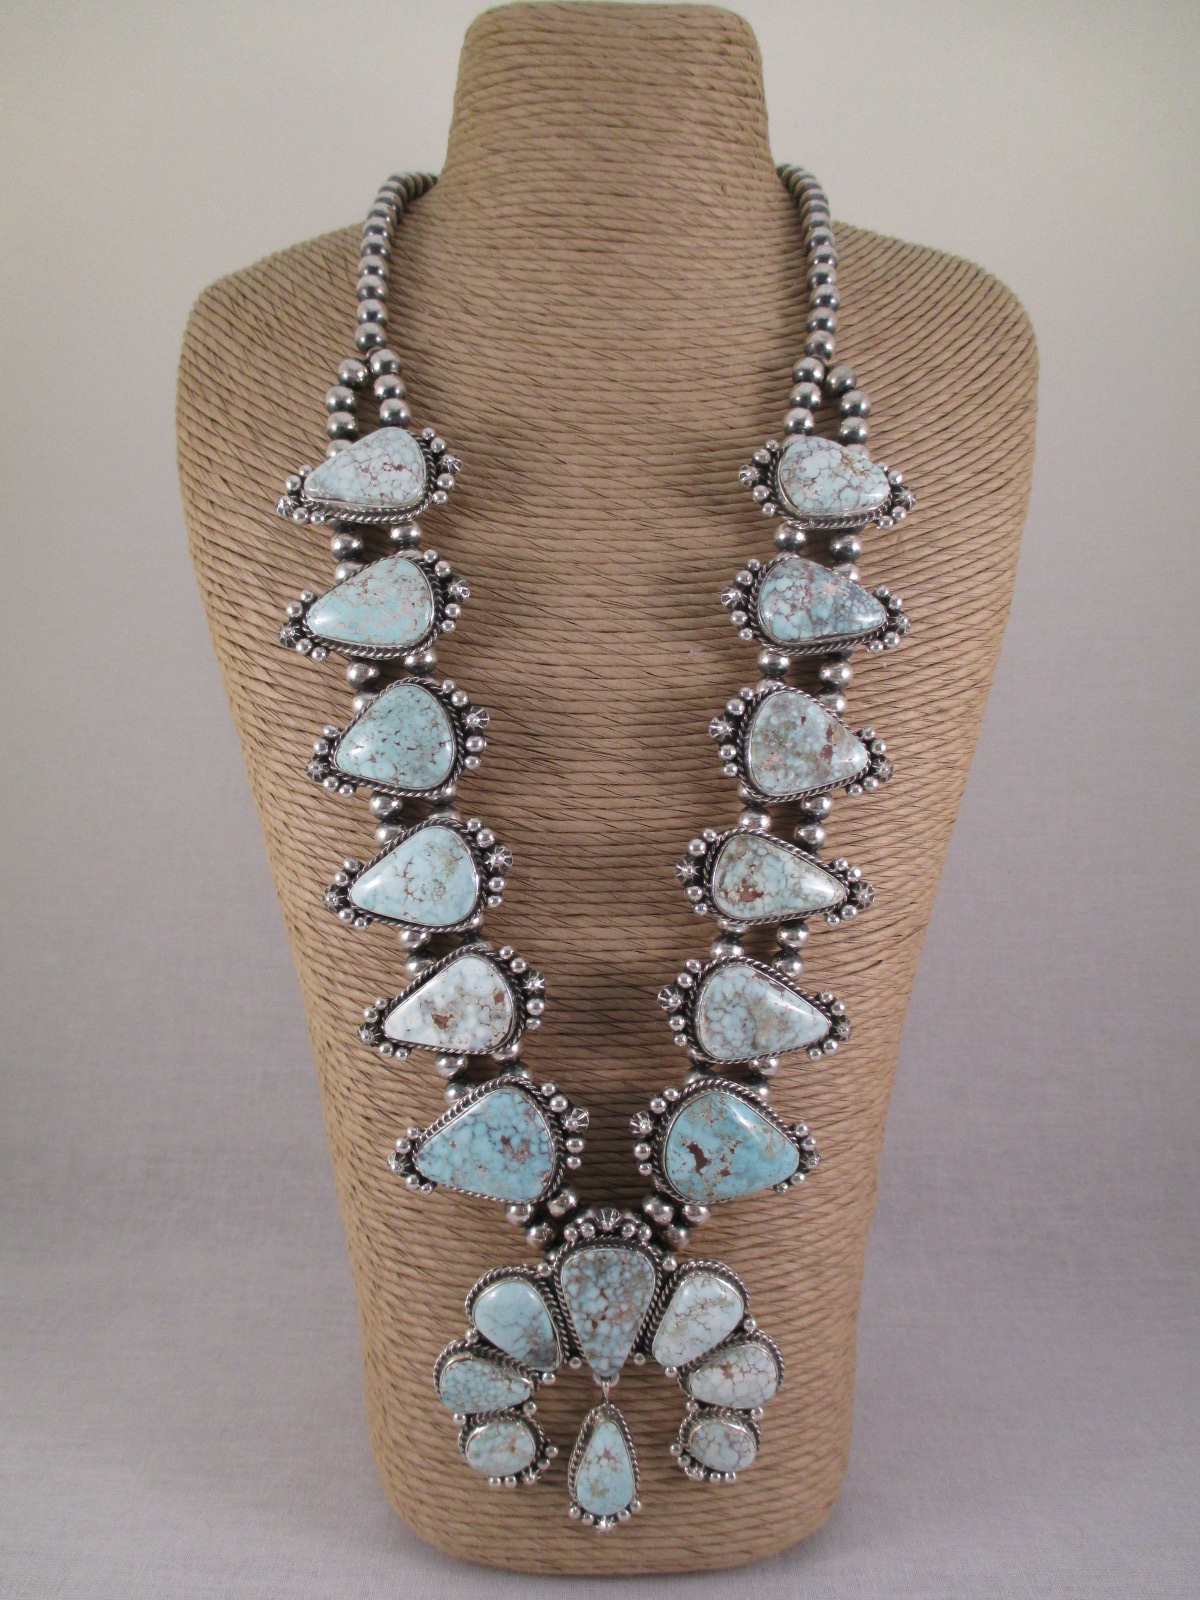 Dry Creek Turquoise Squash Blossom Necklace Earring Set